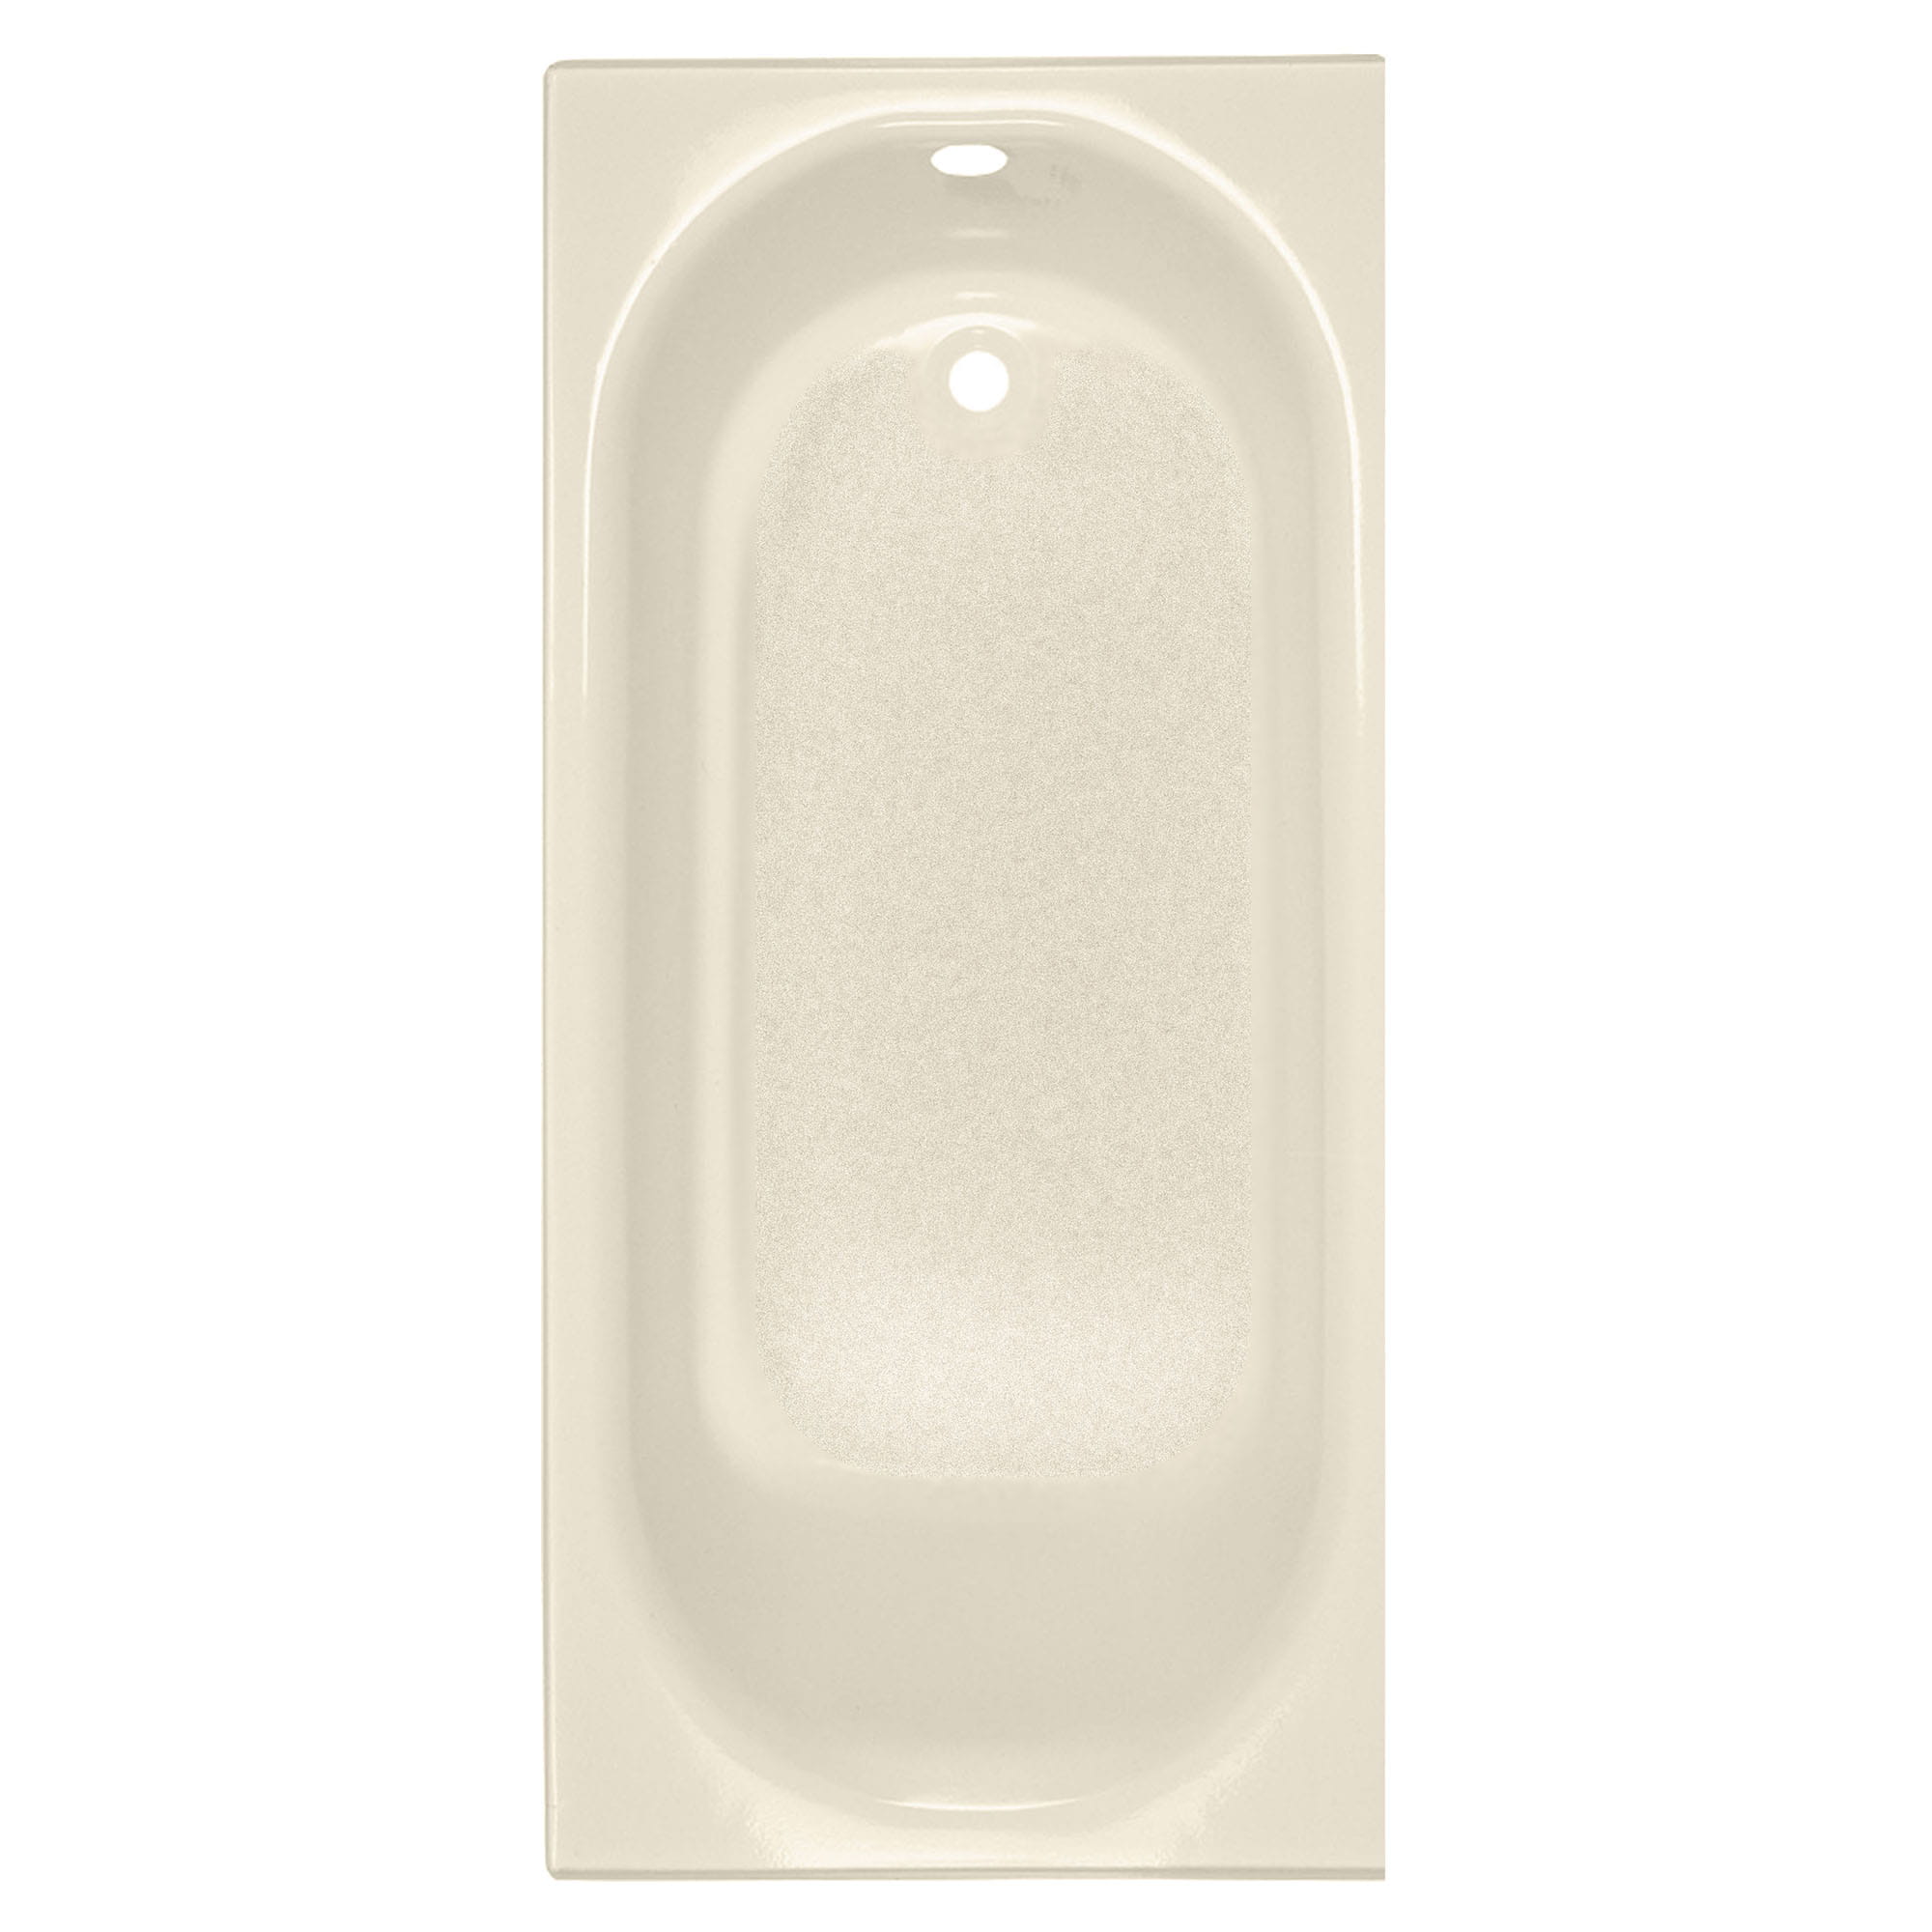 Princeton Americast 60 x 30 Inch Integral Apron Bathtub Above Floor Rough with Left Hand Outlet BONE